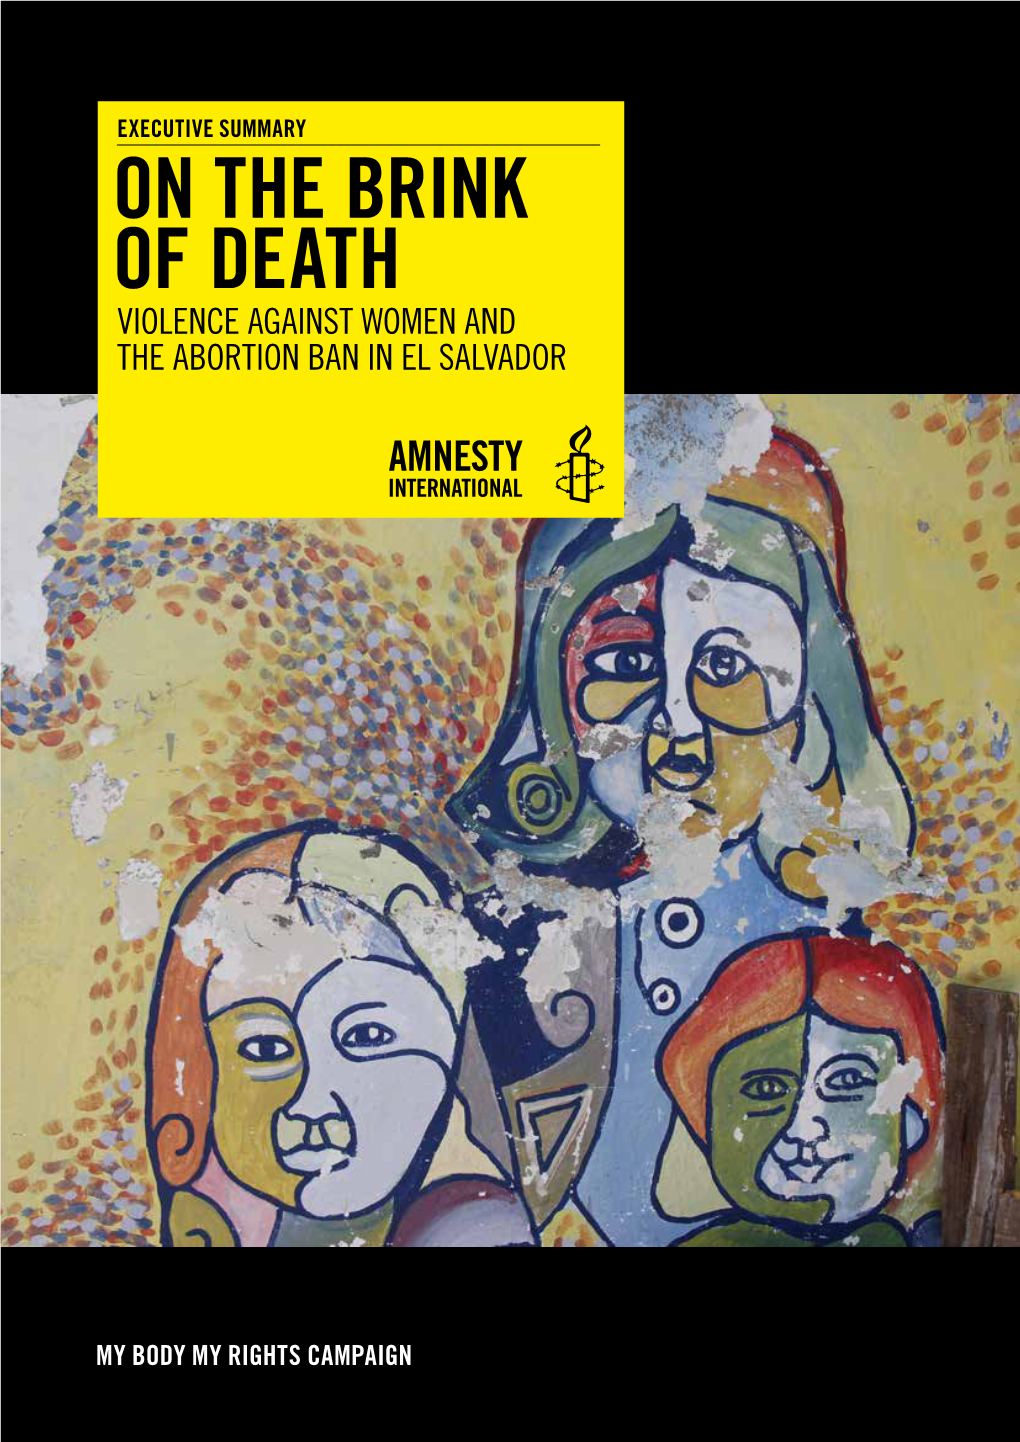 On the Brink of Death: Violence Against Women and the Abortion Ban in El Salvador (Index: AMR 29/003/2014)